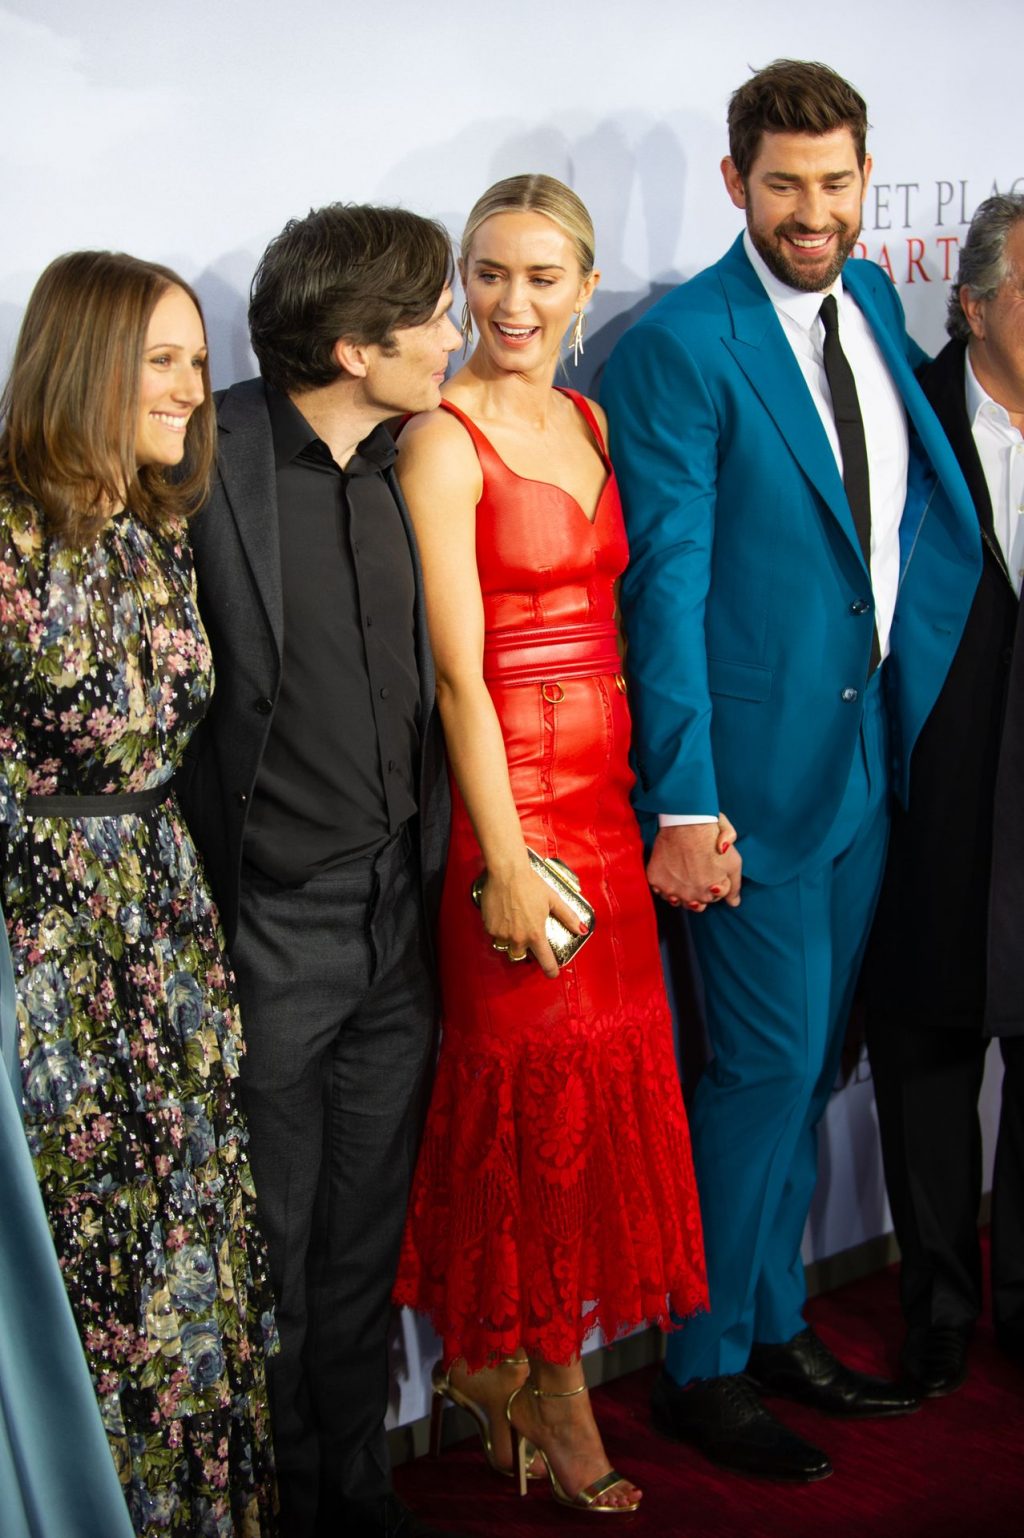 Emily Blunt Flaunts Her Cleavage in a Red Dress at the World Premiere of A Quite Place Part 2 (86 Photos)